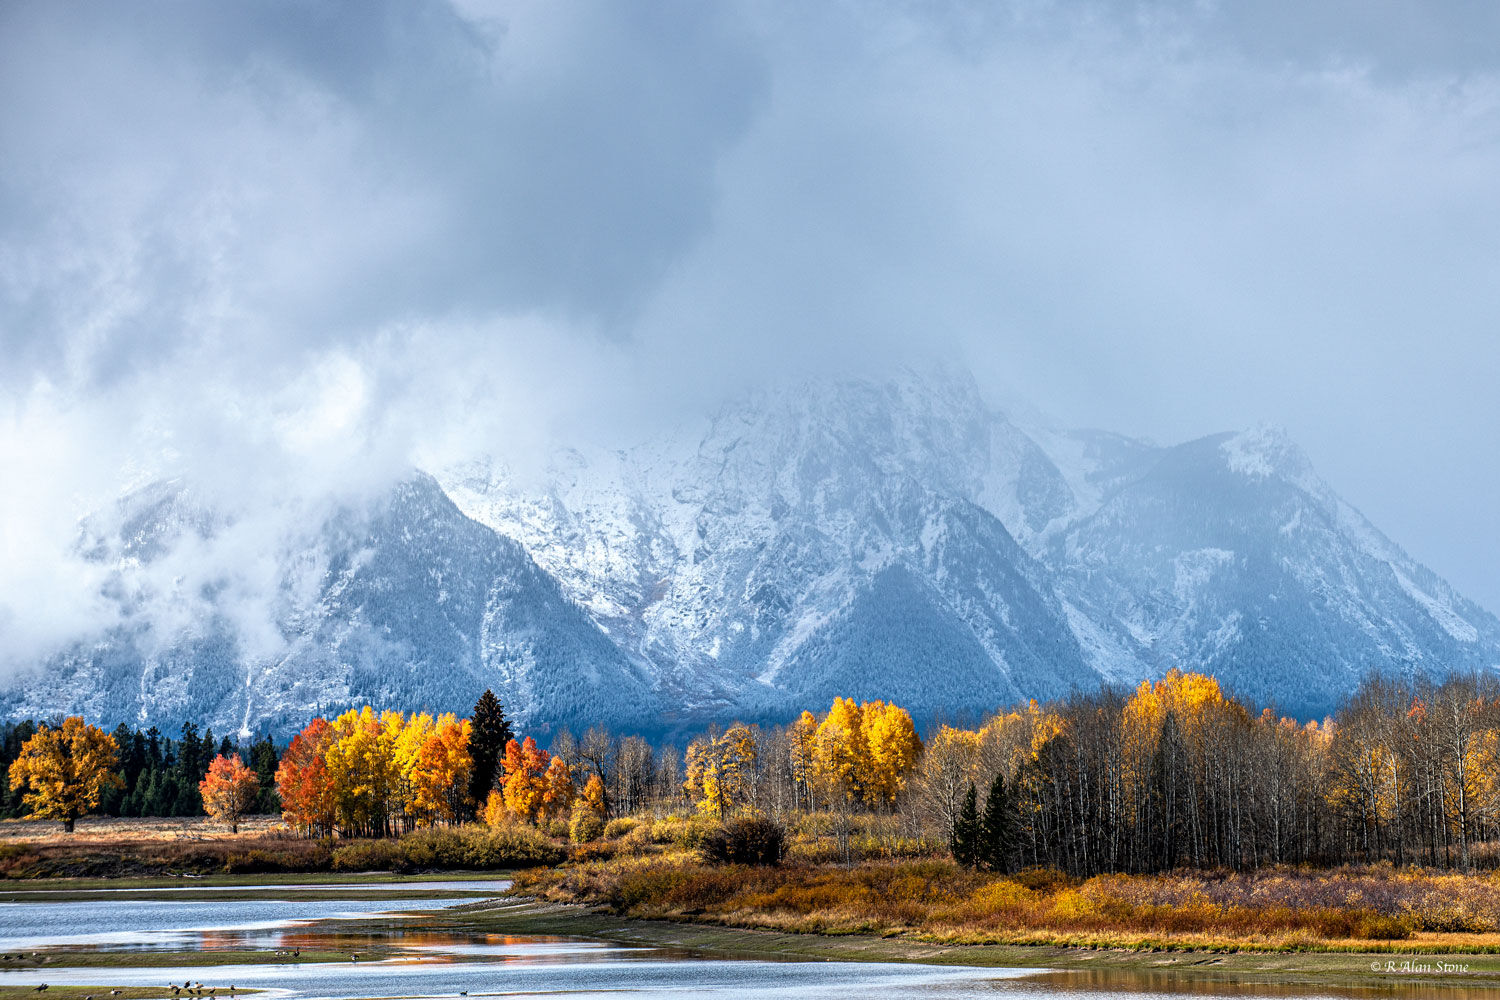 The vivid colors of autumn are on full display at Oxbow Bend, Wyoming. Bright yellow and orange colored cottonwood trees stand...